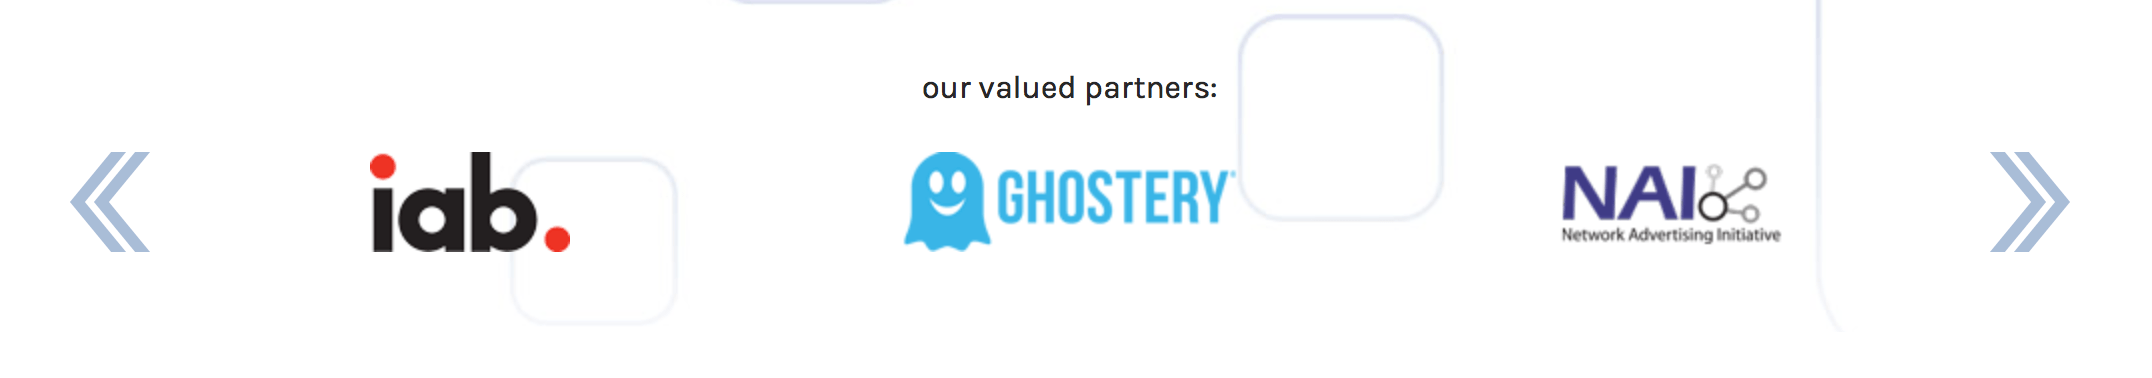 Valued partners